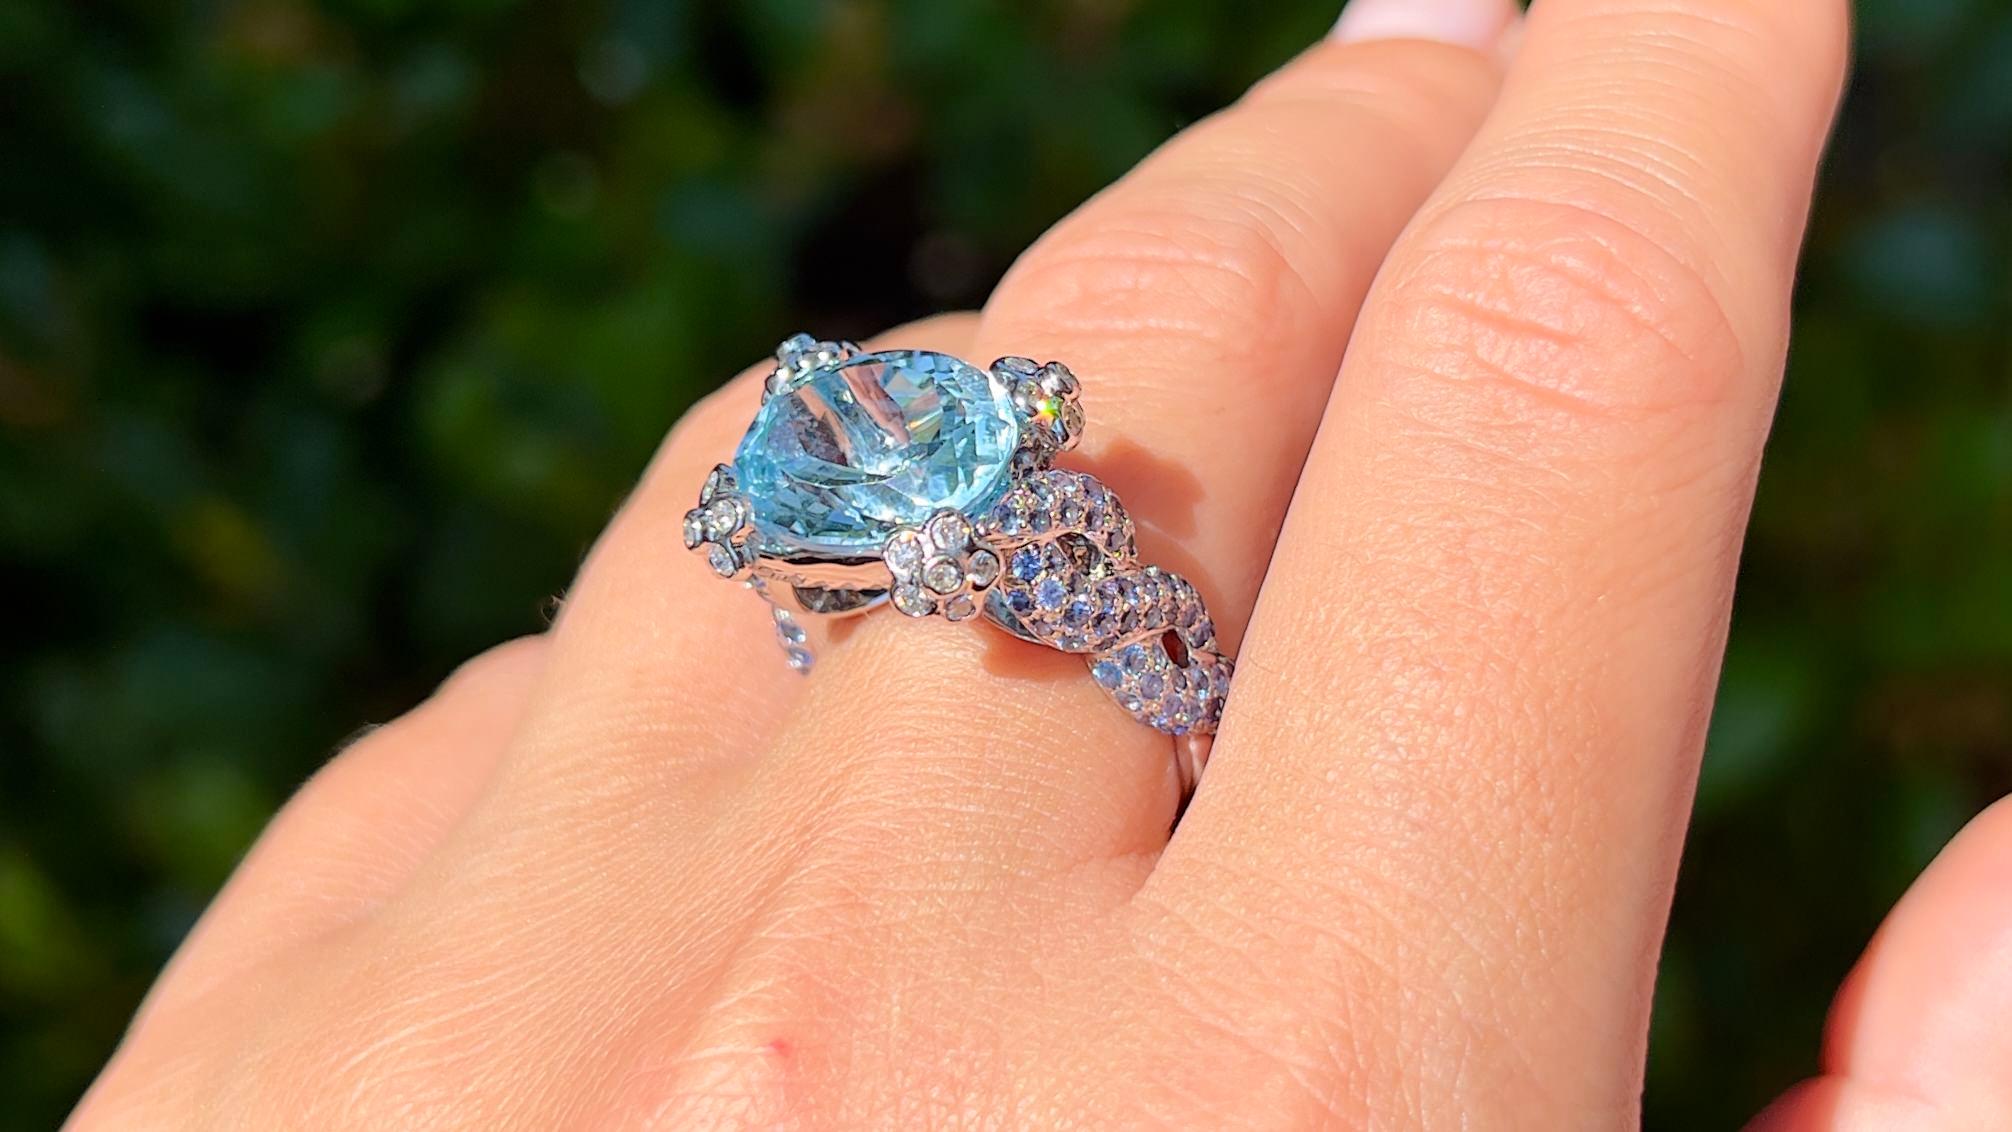 It comes with the Gemological Appraisal by GIA GG/AJP
All Gemstones are Natural
Aquamarine = 5.88 Carats
Cut: Oval
Blue Sapphires = 1.27 Carats
Cut: Round
Diamonds = 0.64 Carats
Cut: Round, Color: F, Clarity: VS
Metal: 18K White Gold
Ring Size: